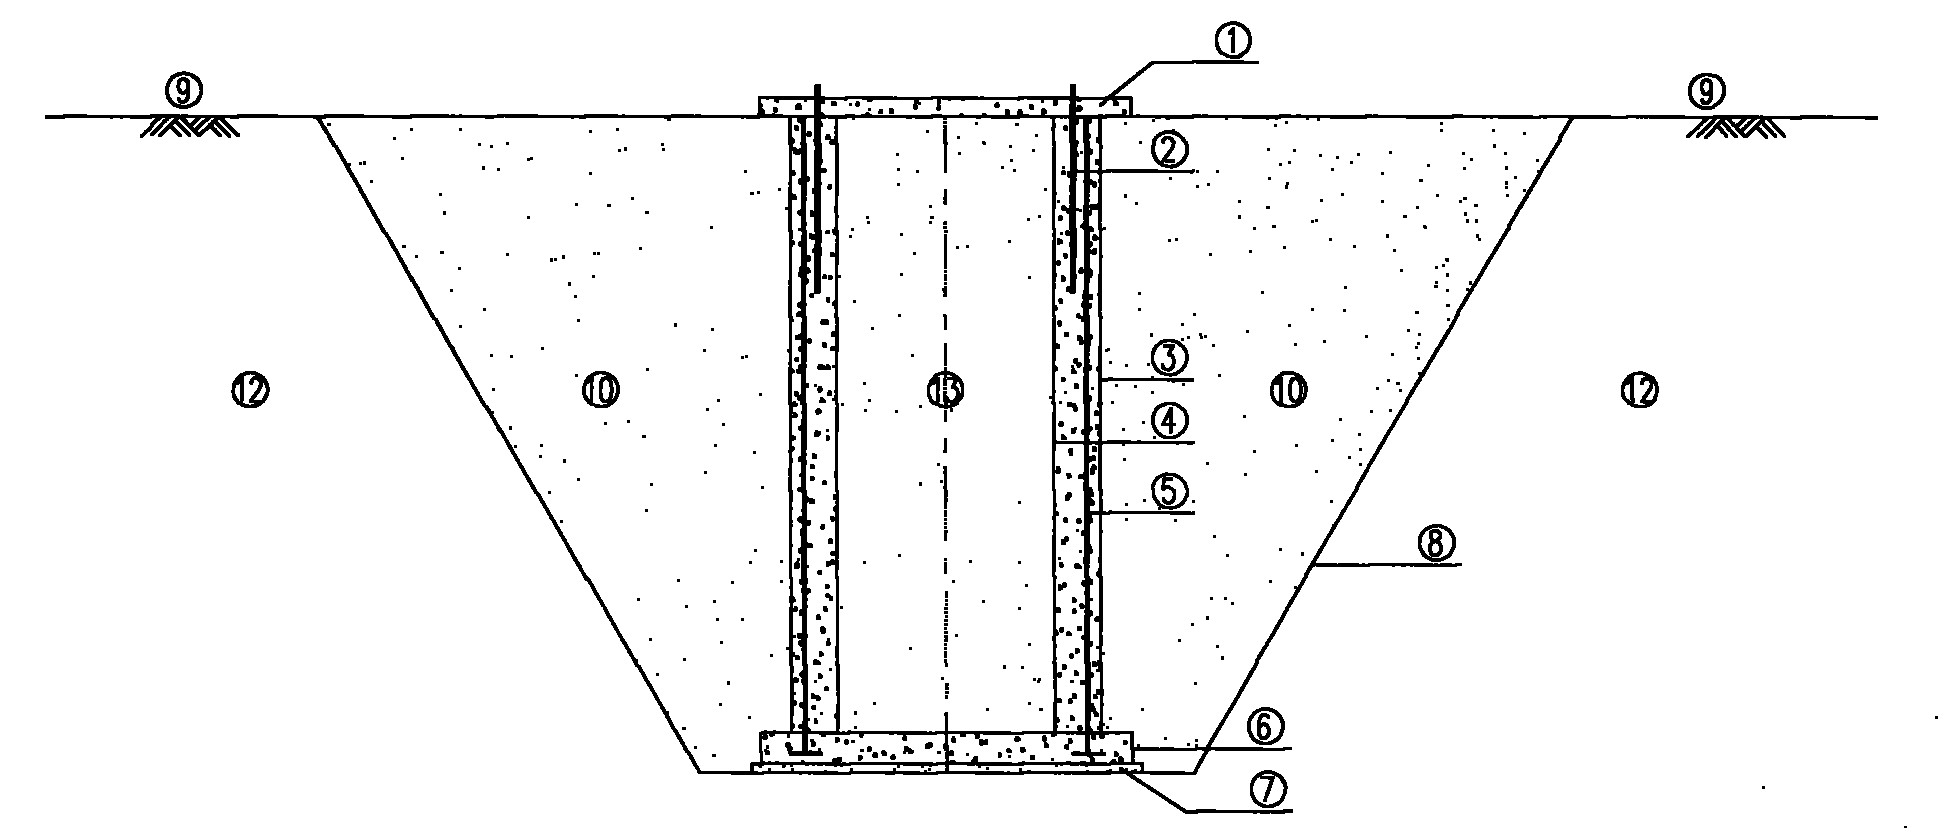 Two-ring grouted single pile foundation